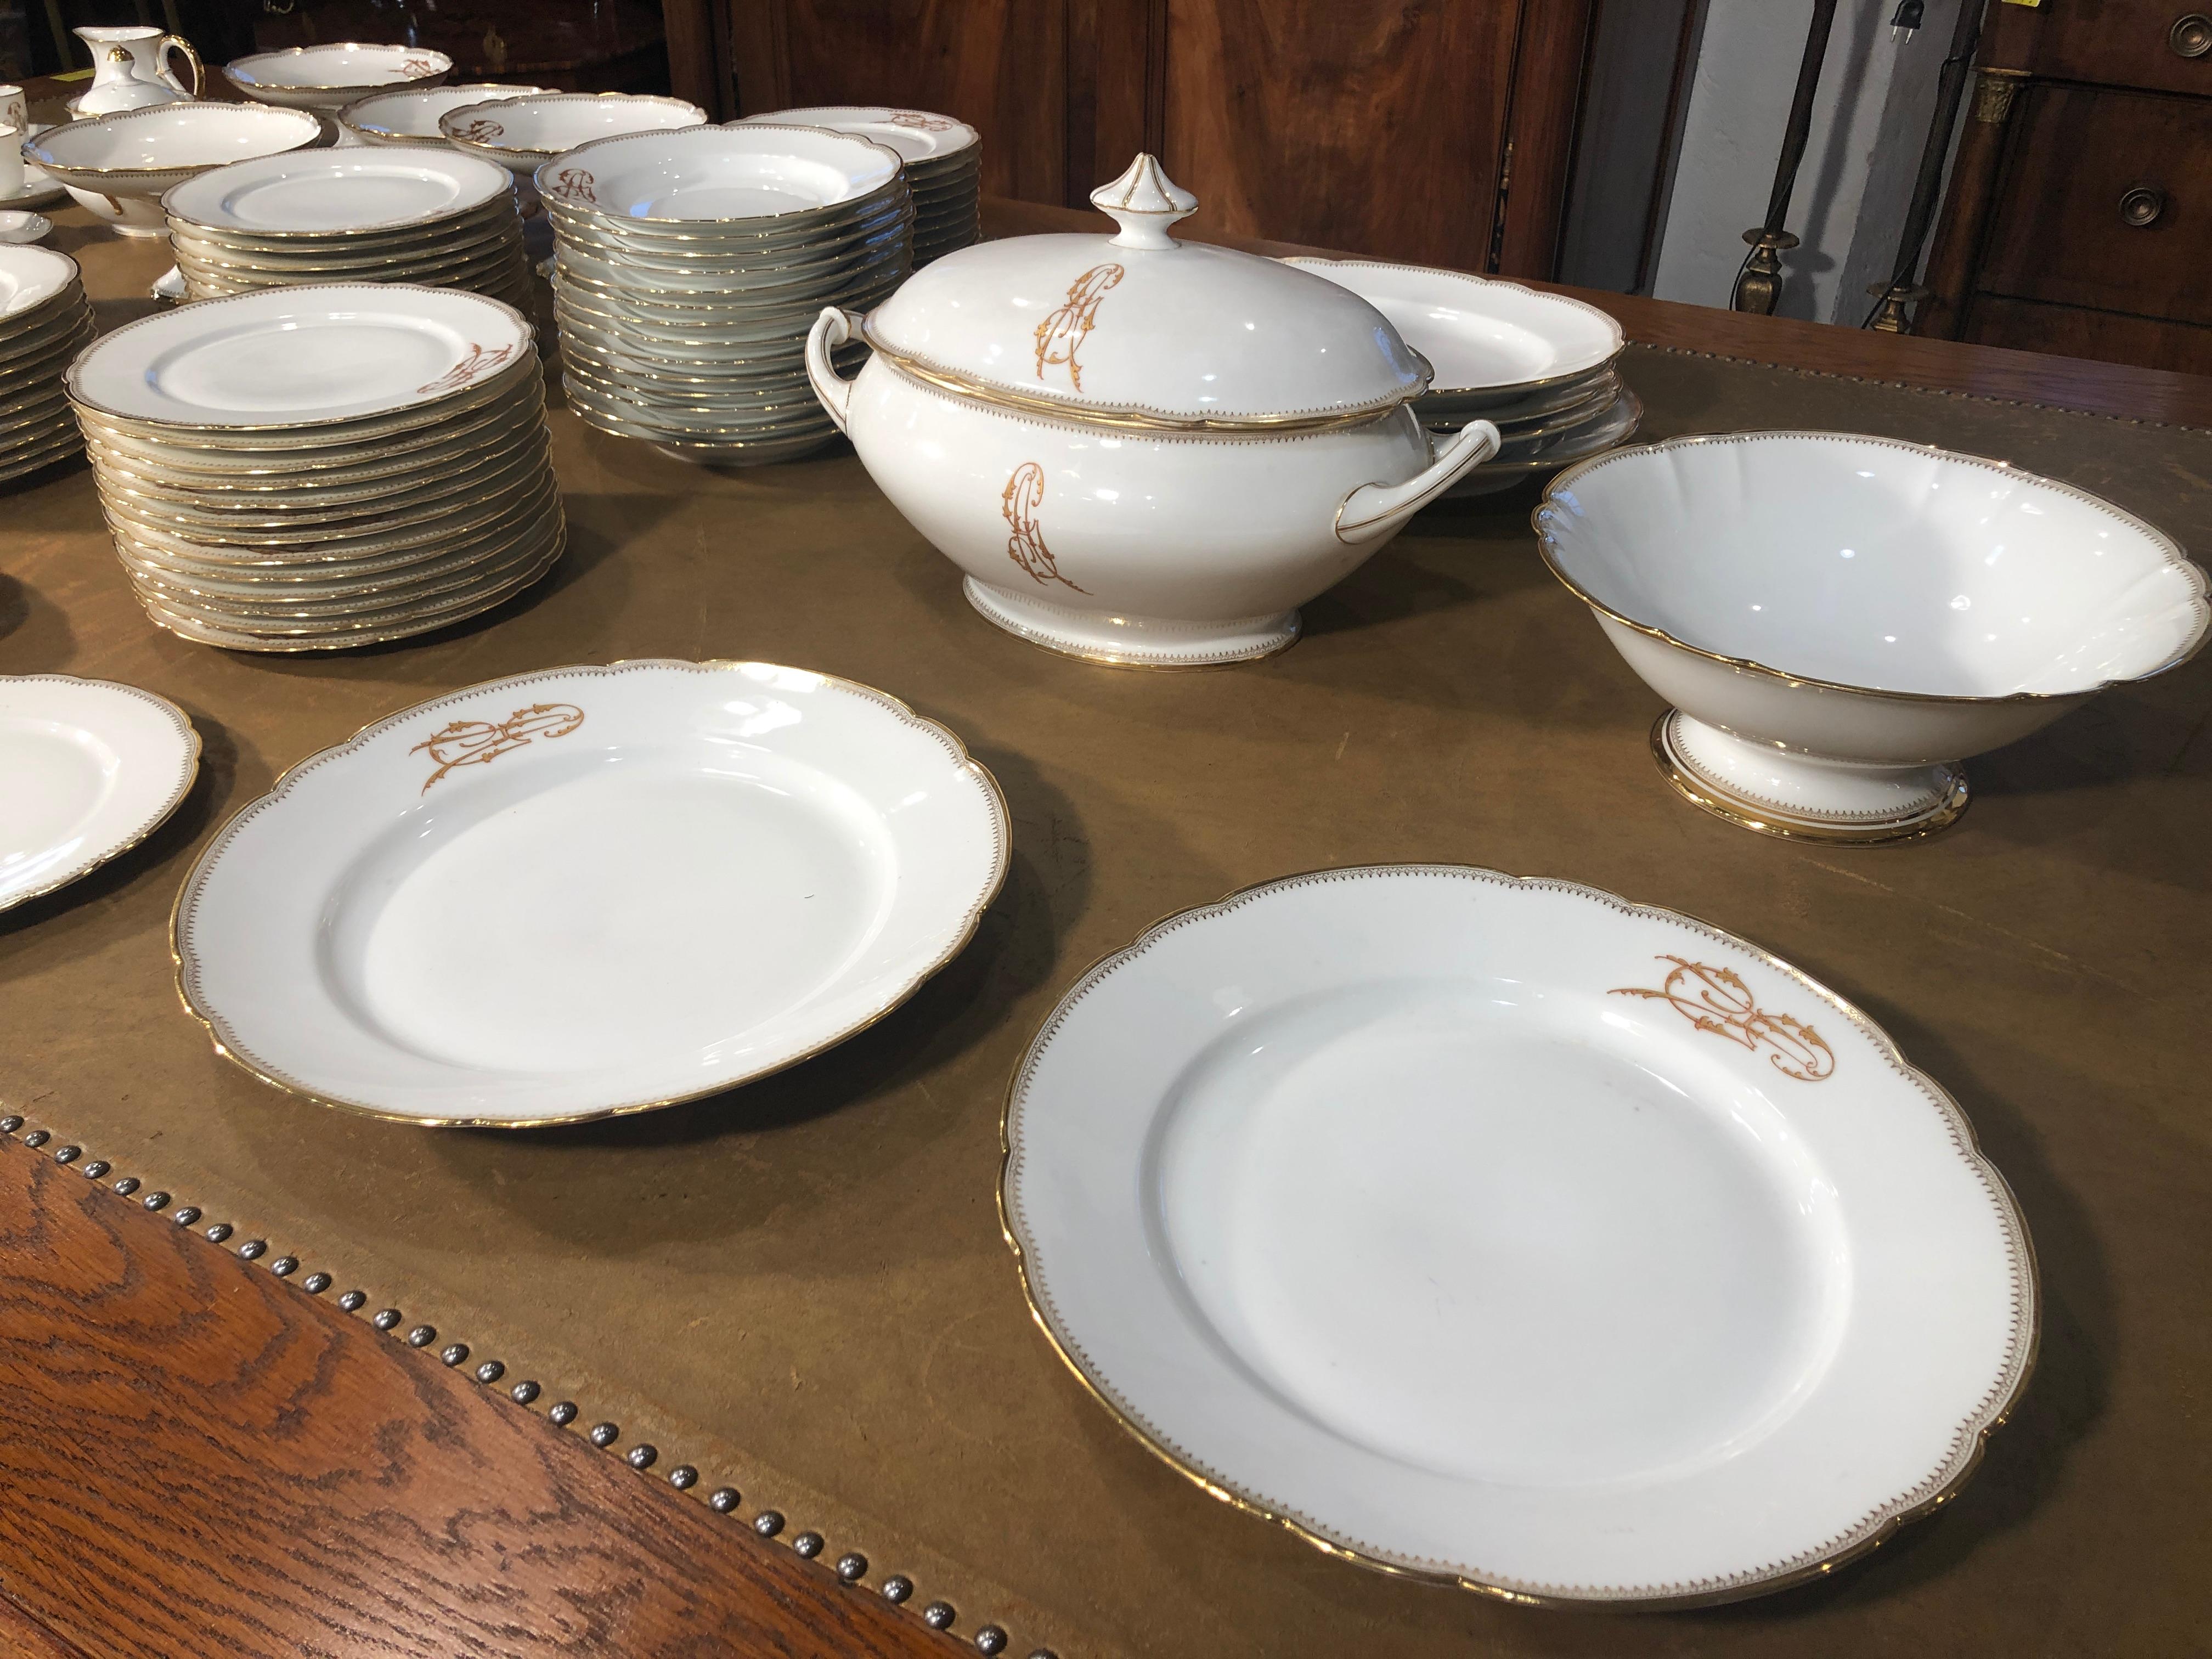 A Fantastic set of 102 pieces of Ginori ceramic, factory origin of Naples, on the edge there are the initials of the family to which it belonged, we think of a noble Neapolitan family, unfortunately we do not have certain information on the name but